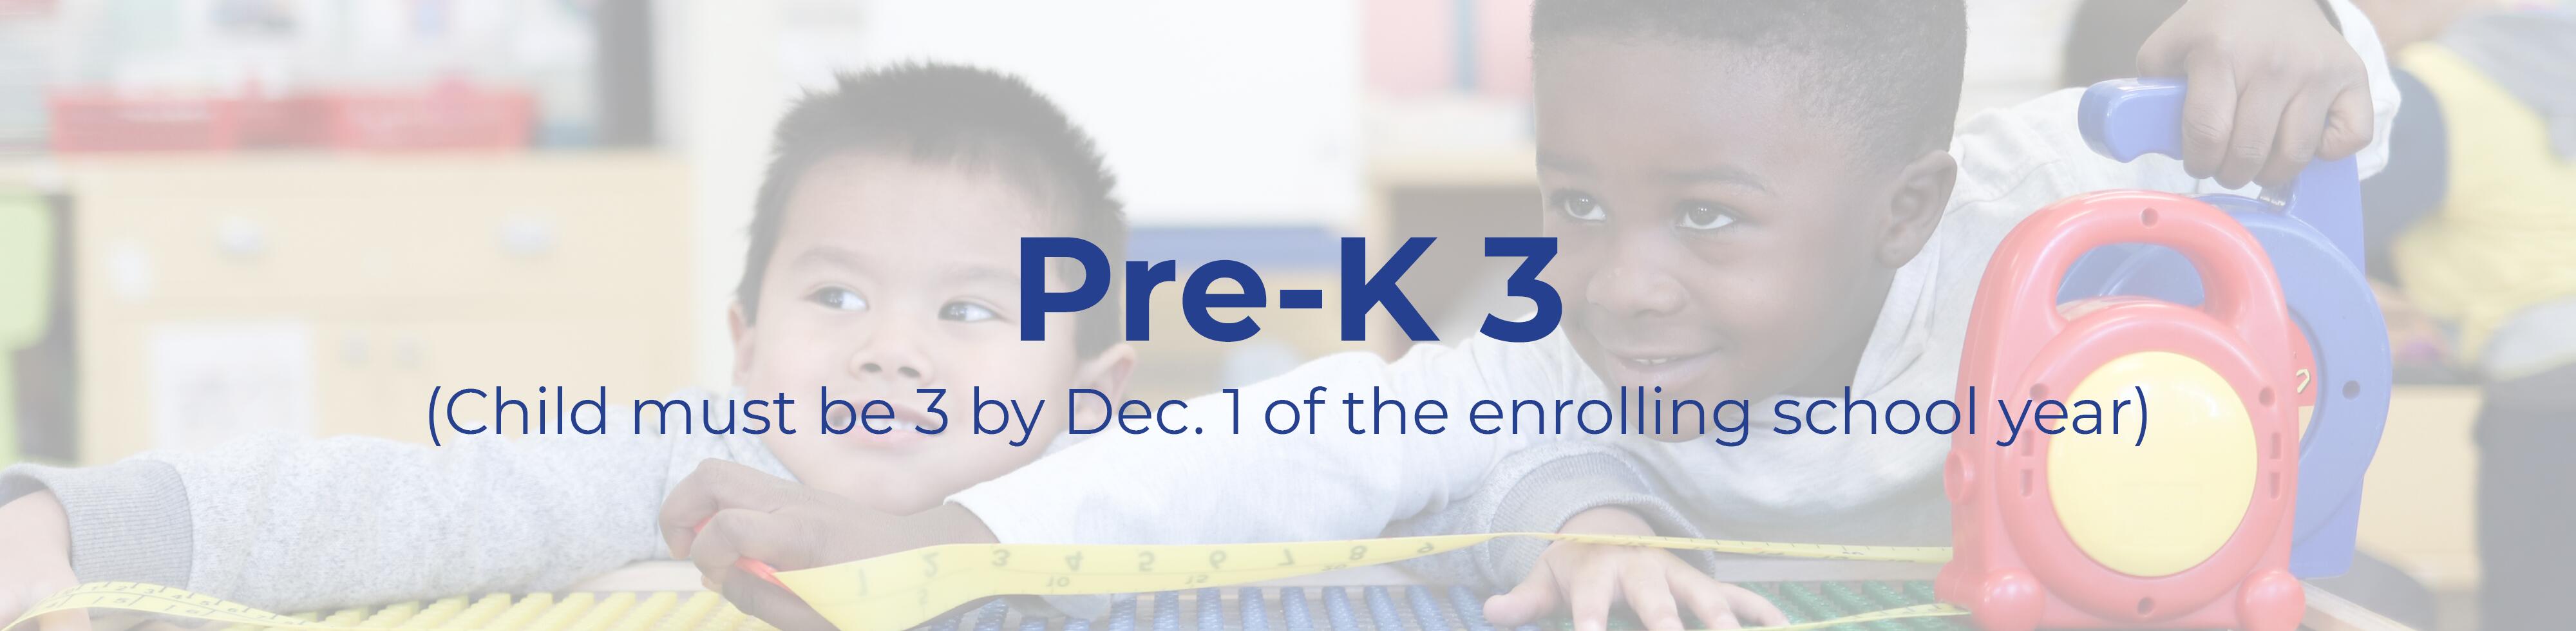 Text that reads: Pre-K 3 (Child must be 3 by Dec. 1 of the enrolling school year)